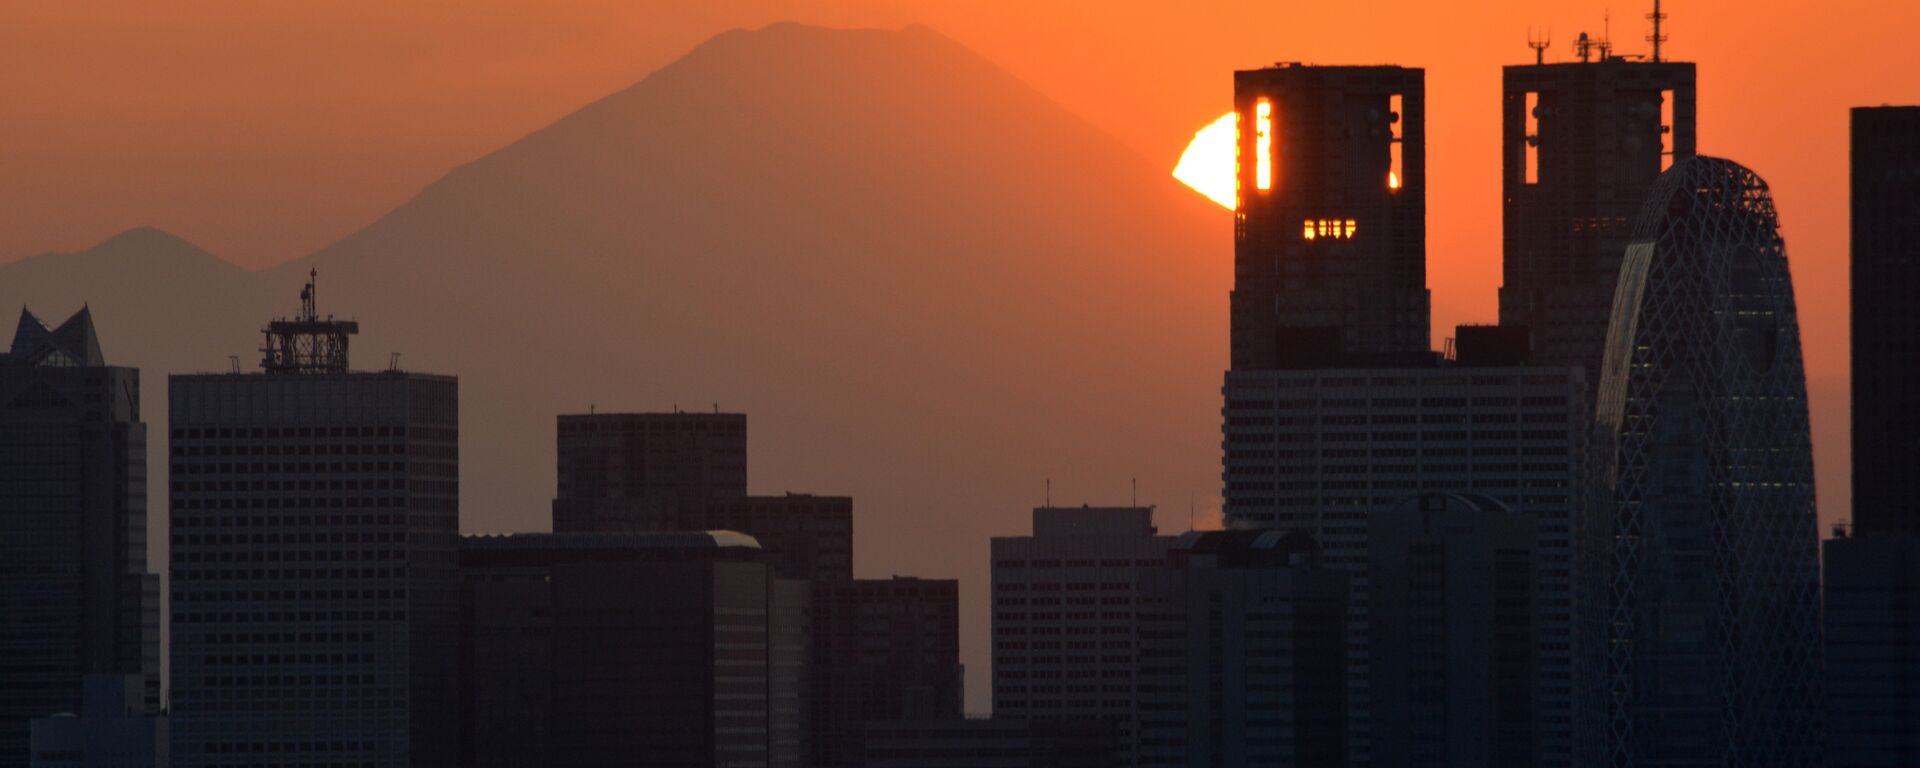 This picture taken on November 7, 2016 shows the sun setting behind the Japan's highest mountain Mount Fuji and skyscrapers in Tokyo's Shinjuku area. - Sputnik International, 1920, 23.12.2018